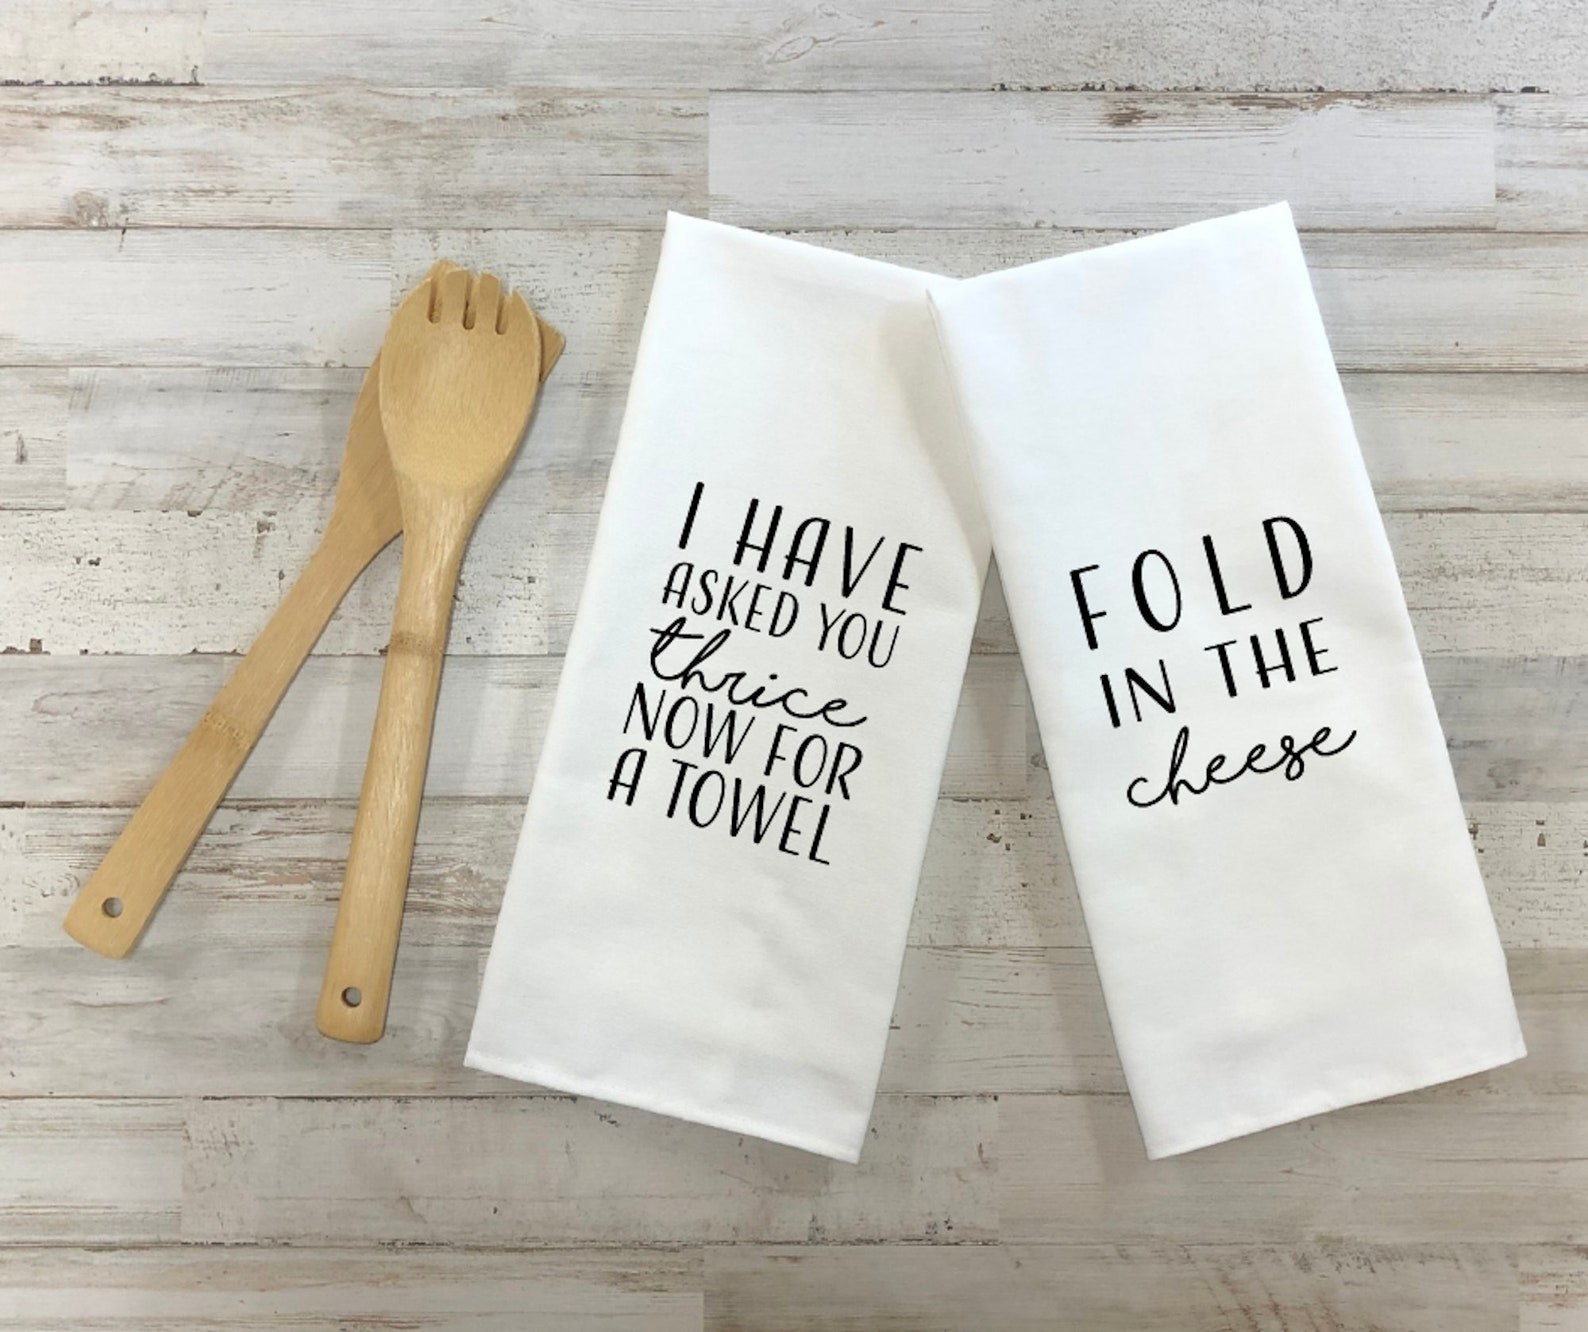 a white dish towel that says &quot;i have asked your thrice now for a towel&quot; and another that says &quot;fold in the cheese: